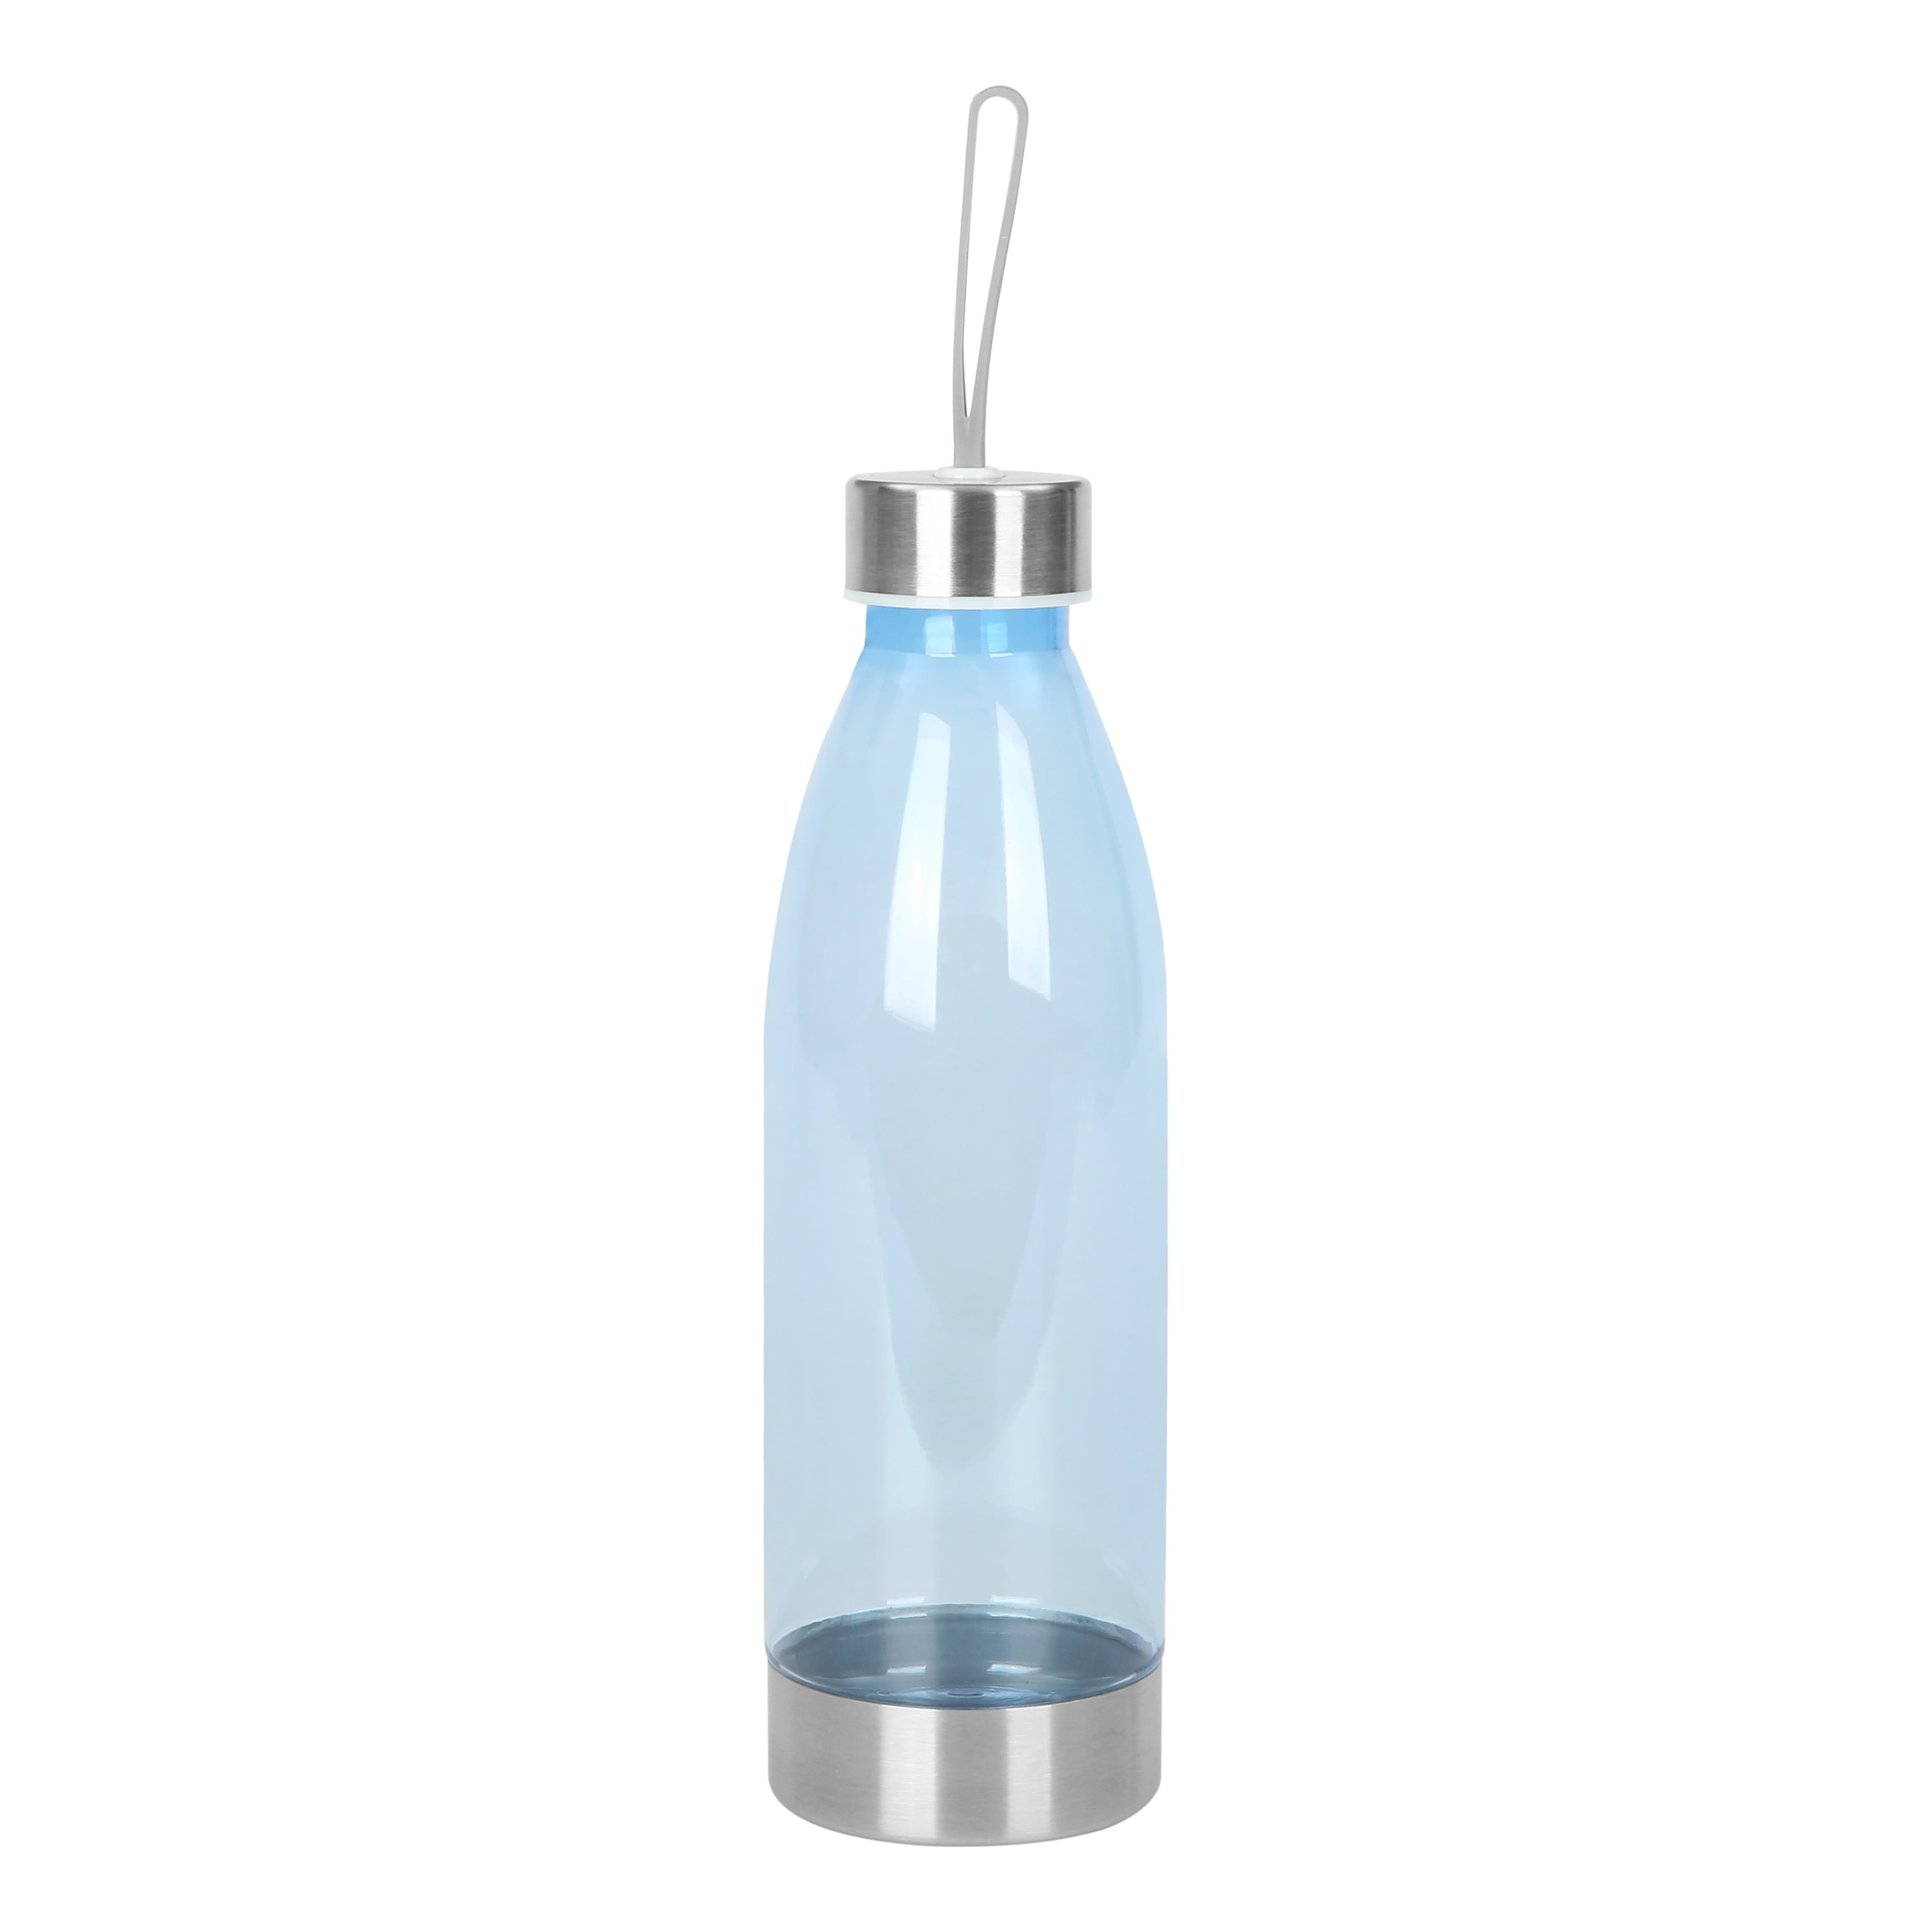 Mainstays 22oz (22 Fluid Ounces) Blue Plastic Water Bottle with Strap and Stainless Steel Lid